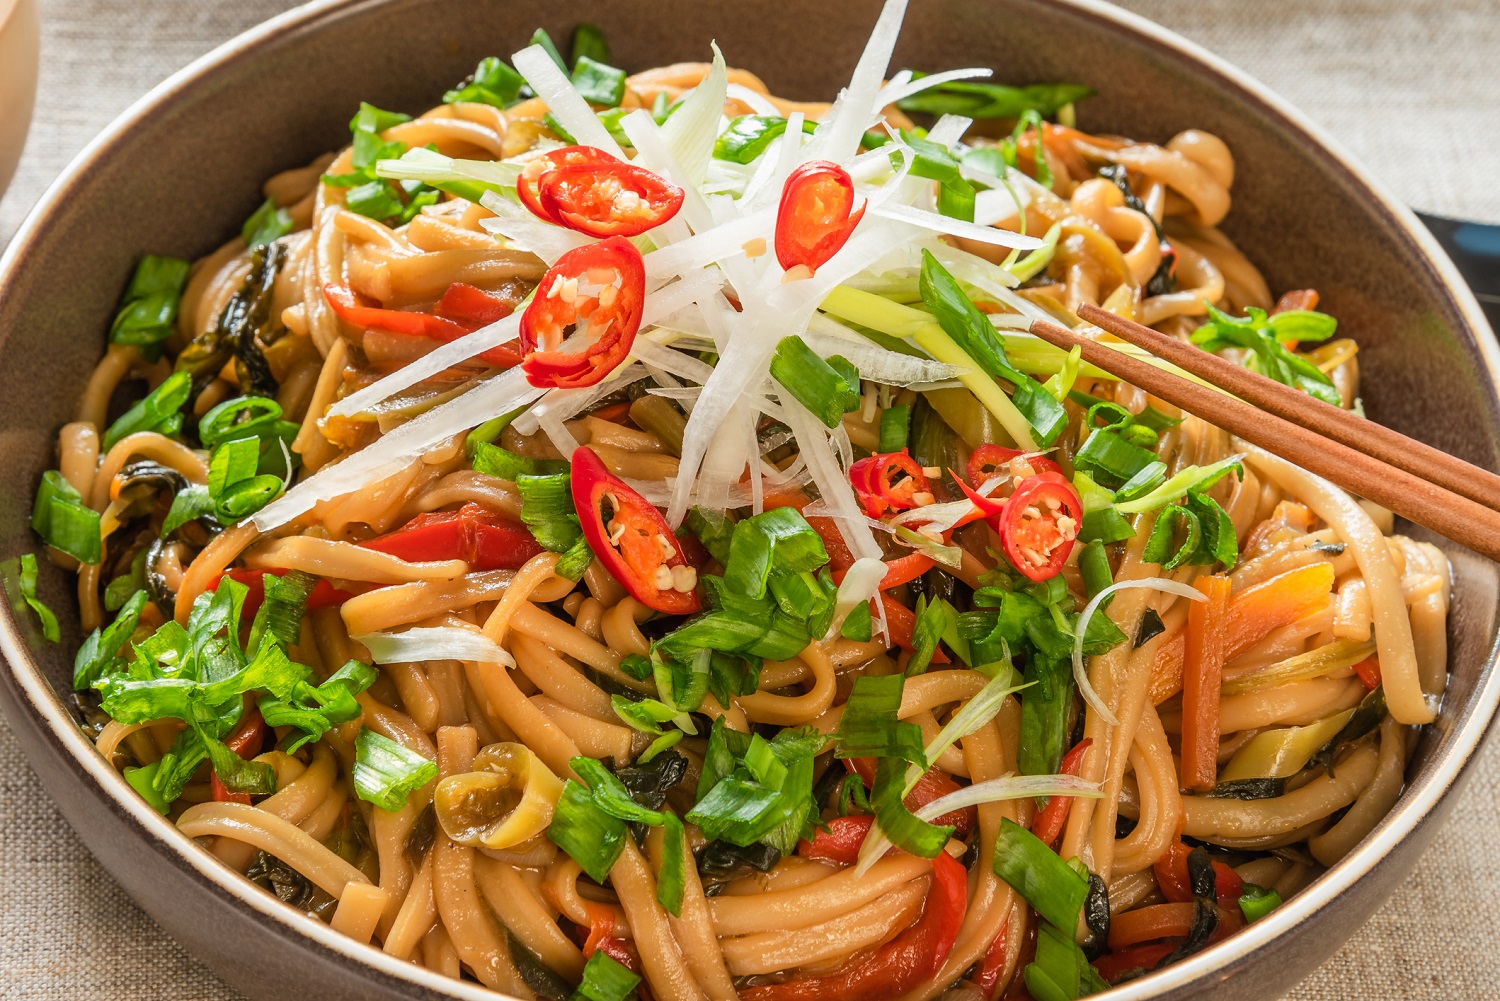 Recipe of the day: Vegetable chow mein | The Citizen